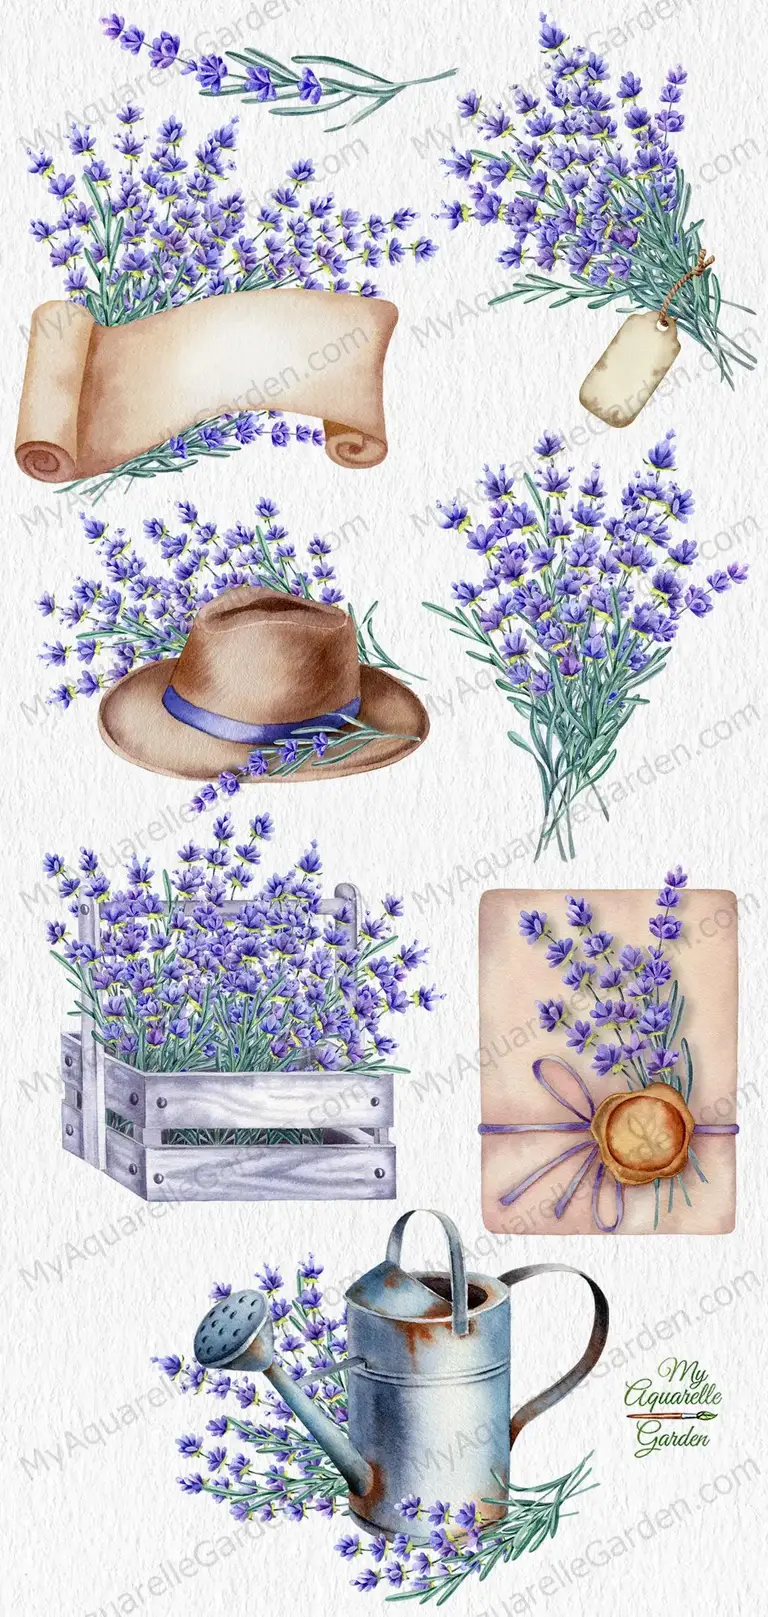 Lavender bouquets. Watering can, wooden crate, wide-brimmed hat, letter.